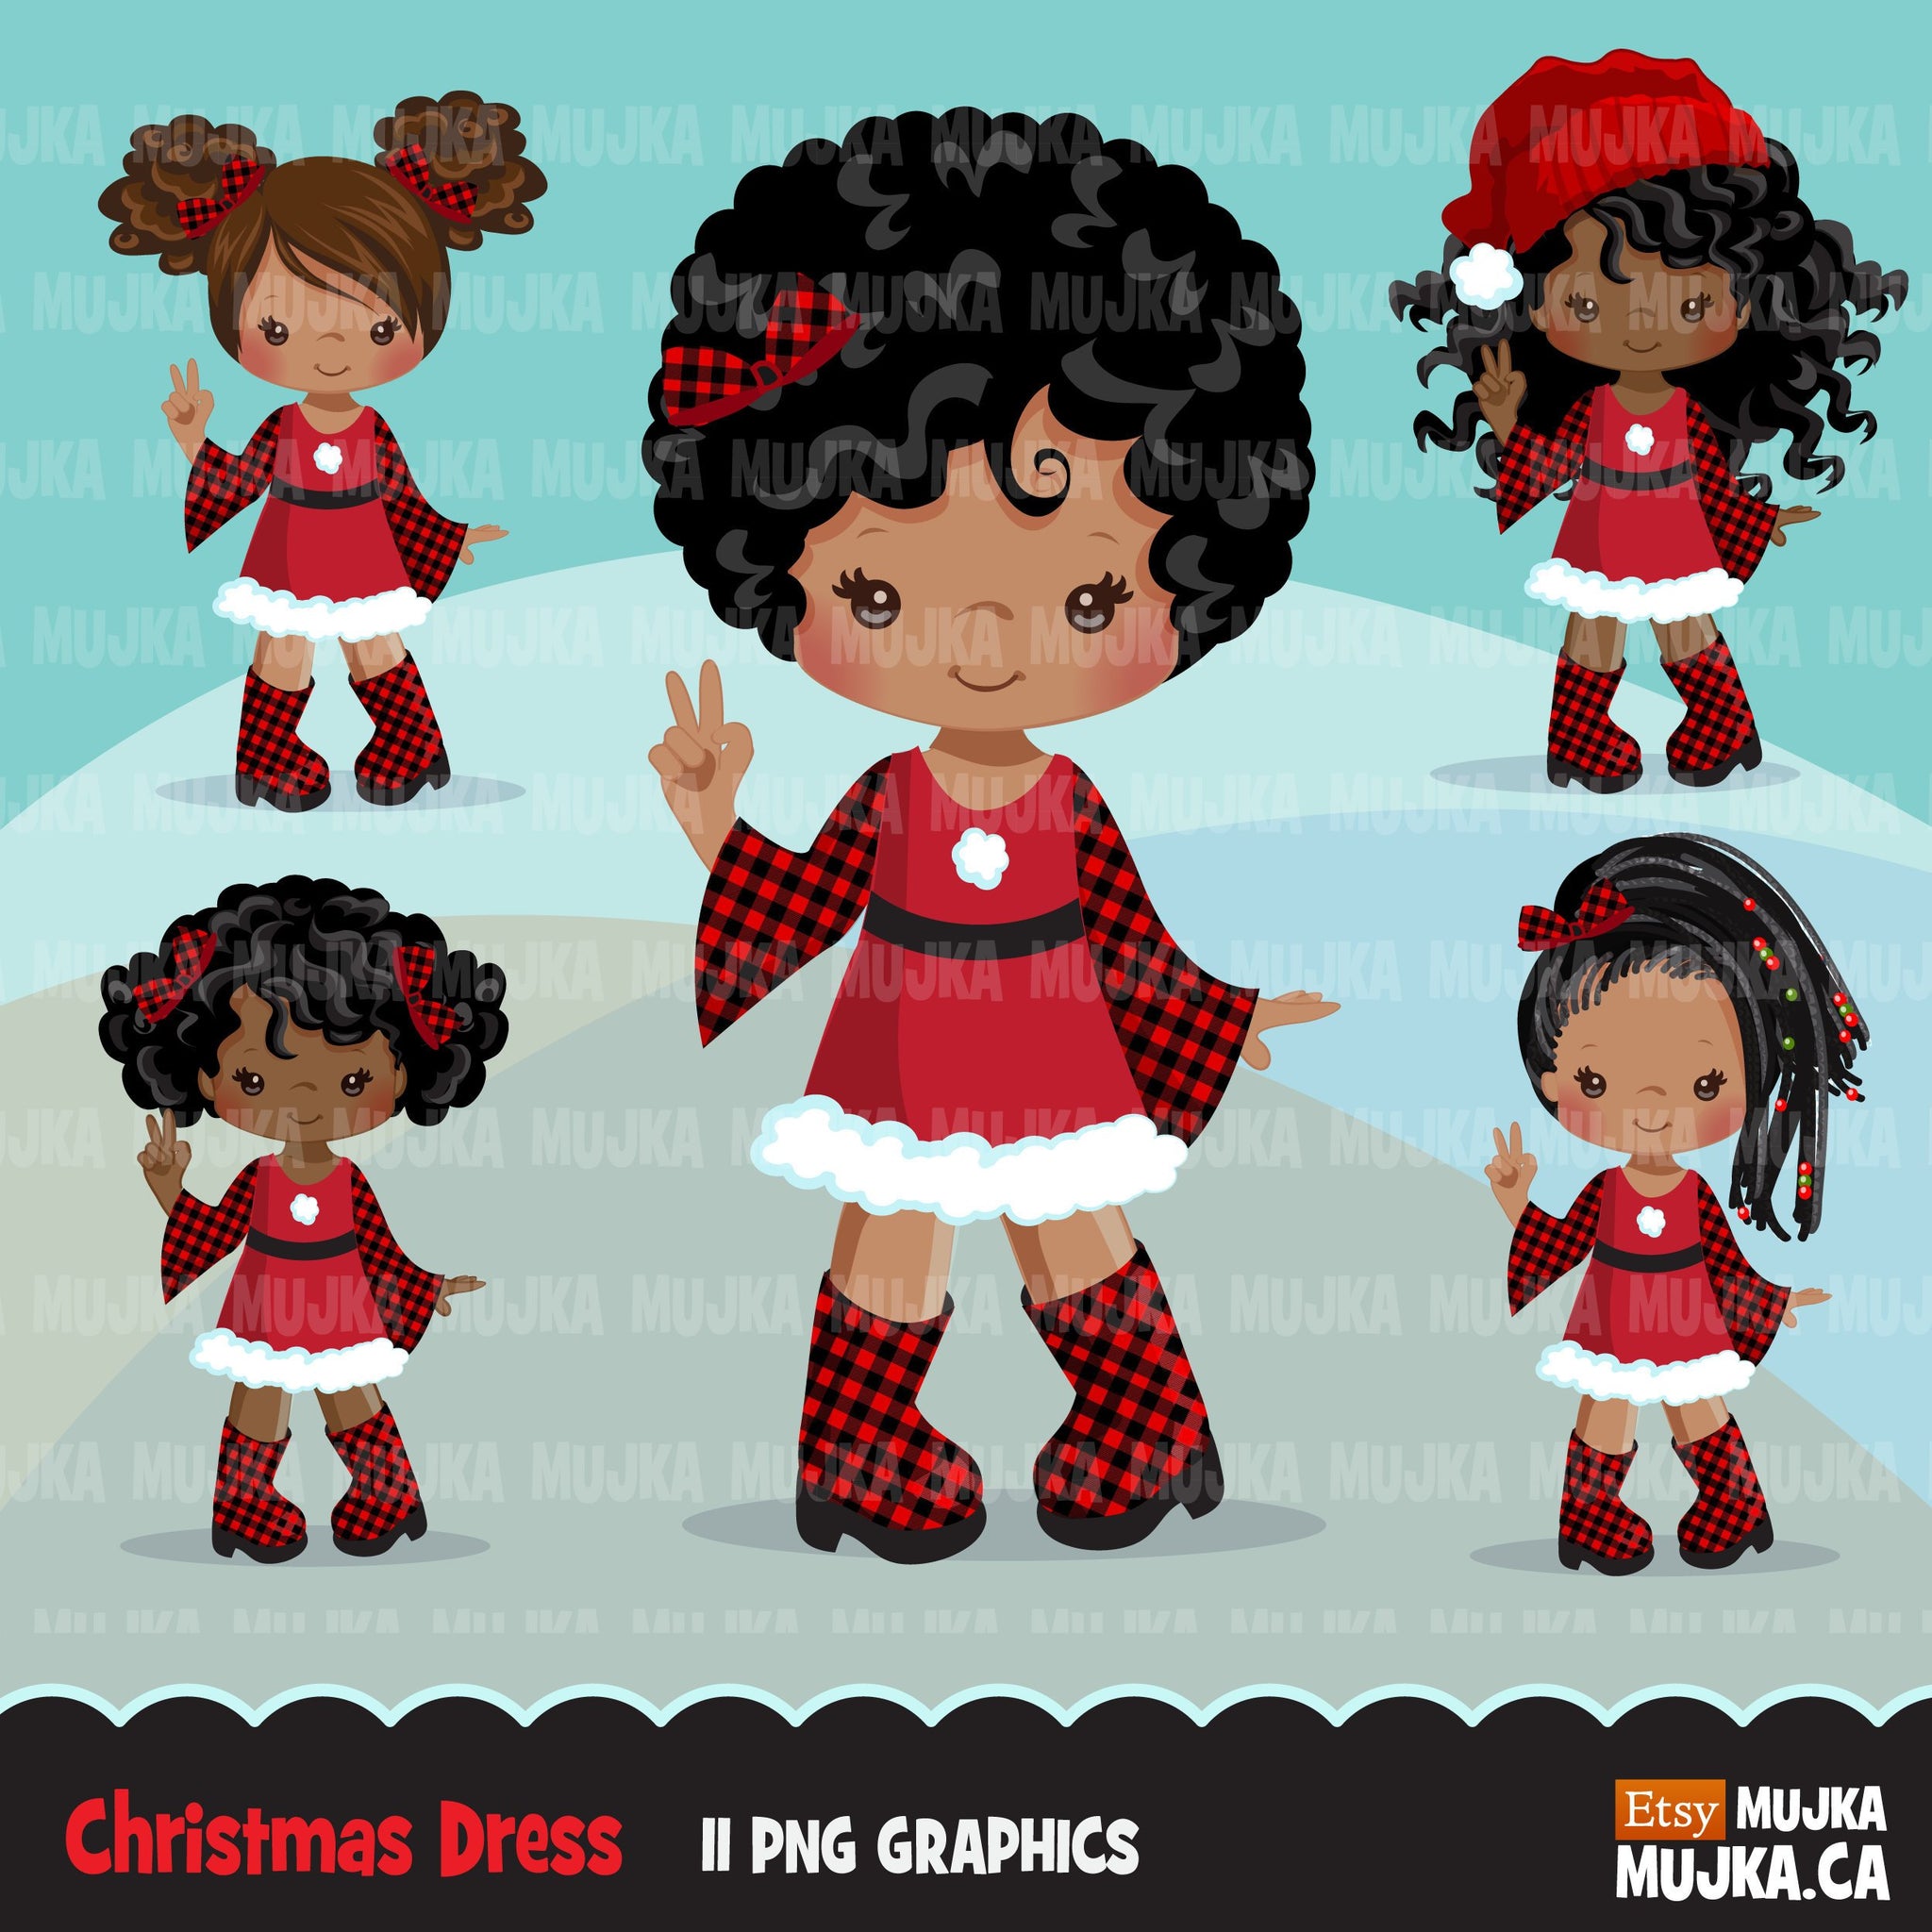 Christmas clipart, Santa little black girls with plaid dress, commercial use graphics, afro plaid